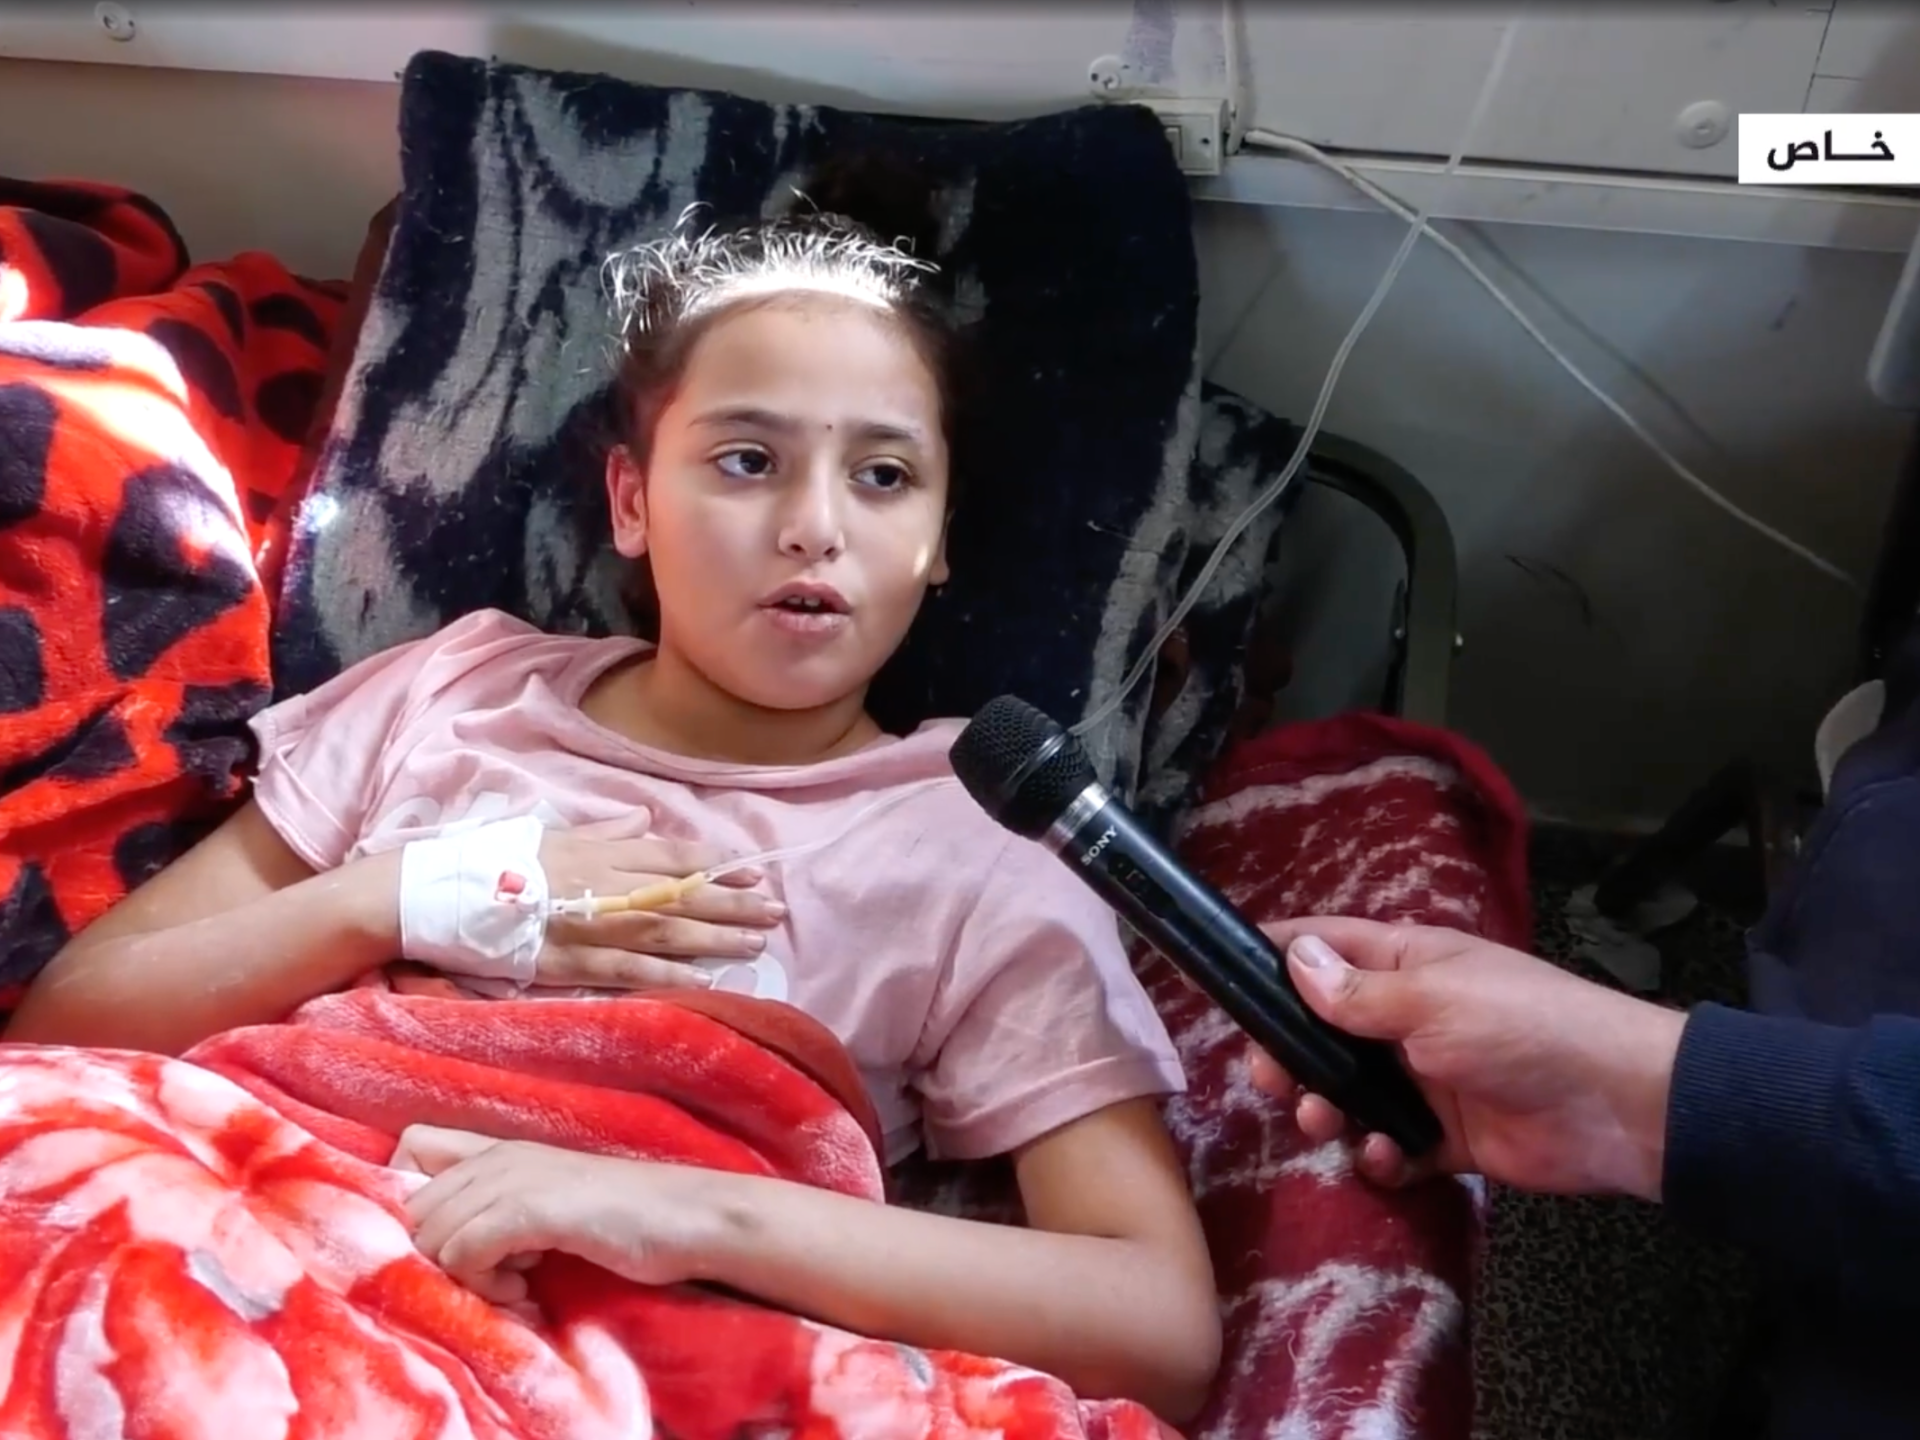 Her classroom became a hospital where she lay.. A child in Gaza wishes to travel to Egypt to walk again (video) |  Al-Aqsa Flood News